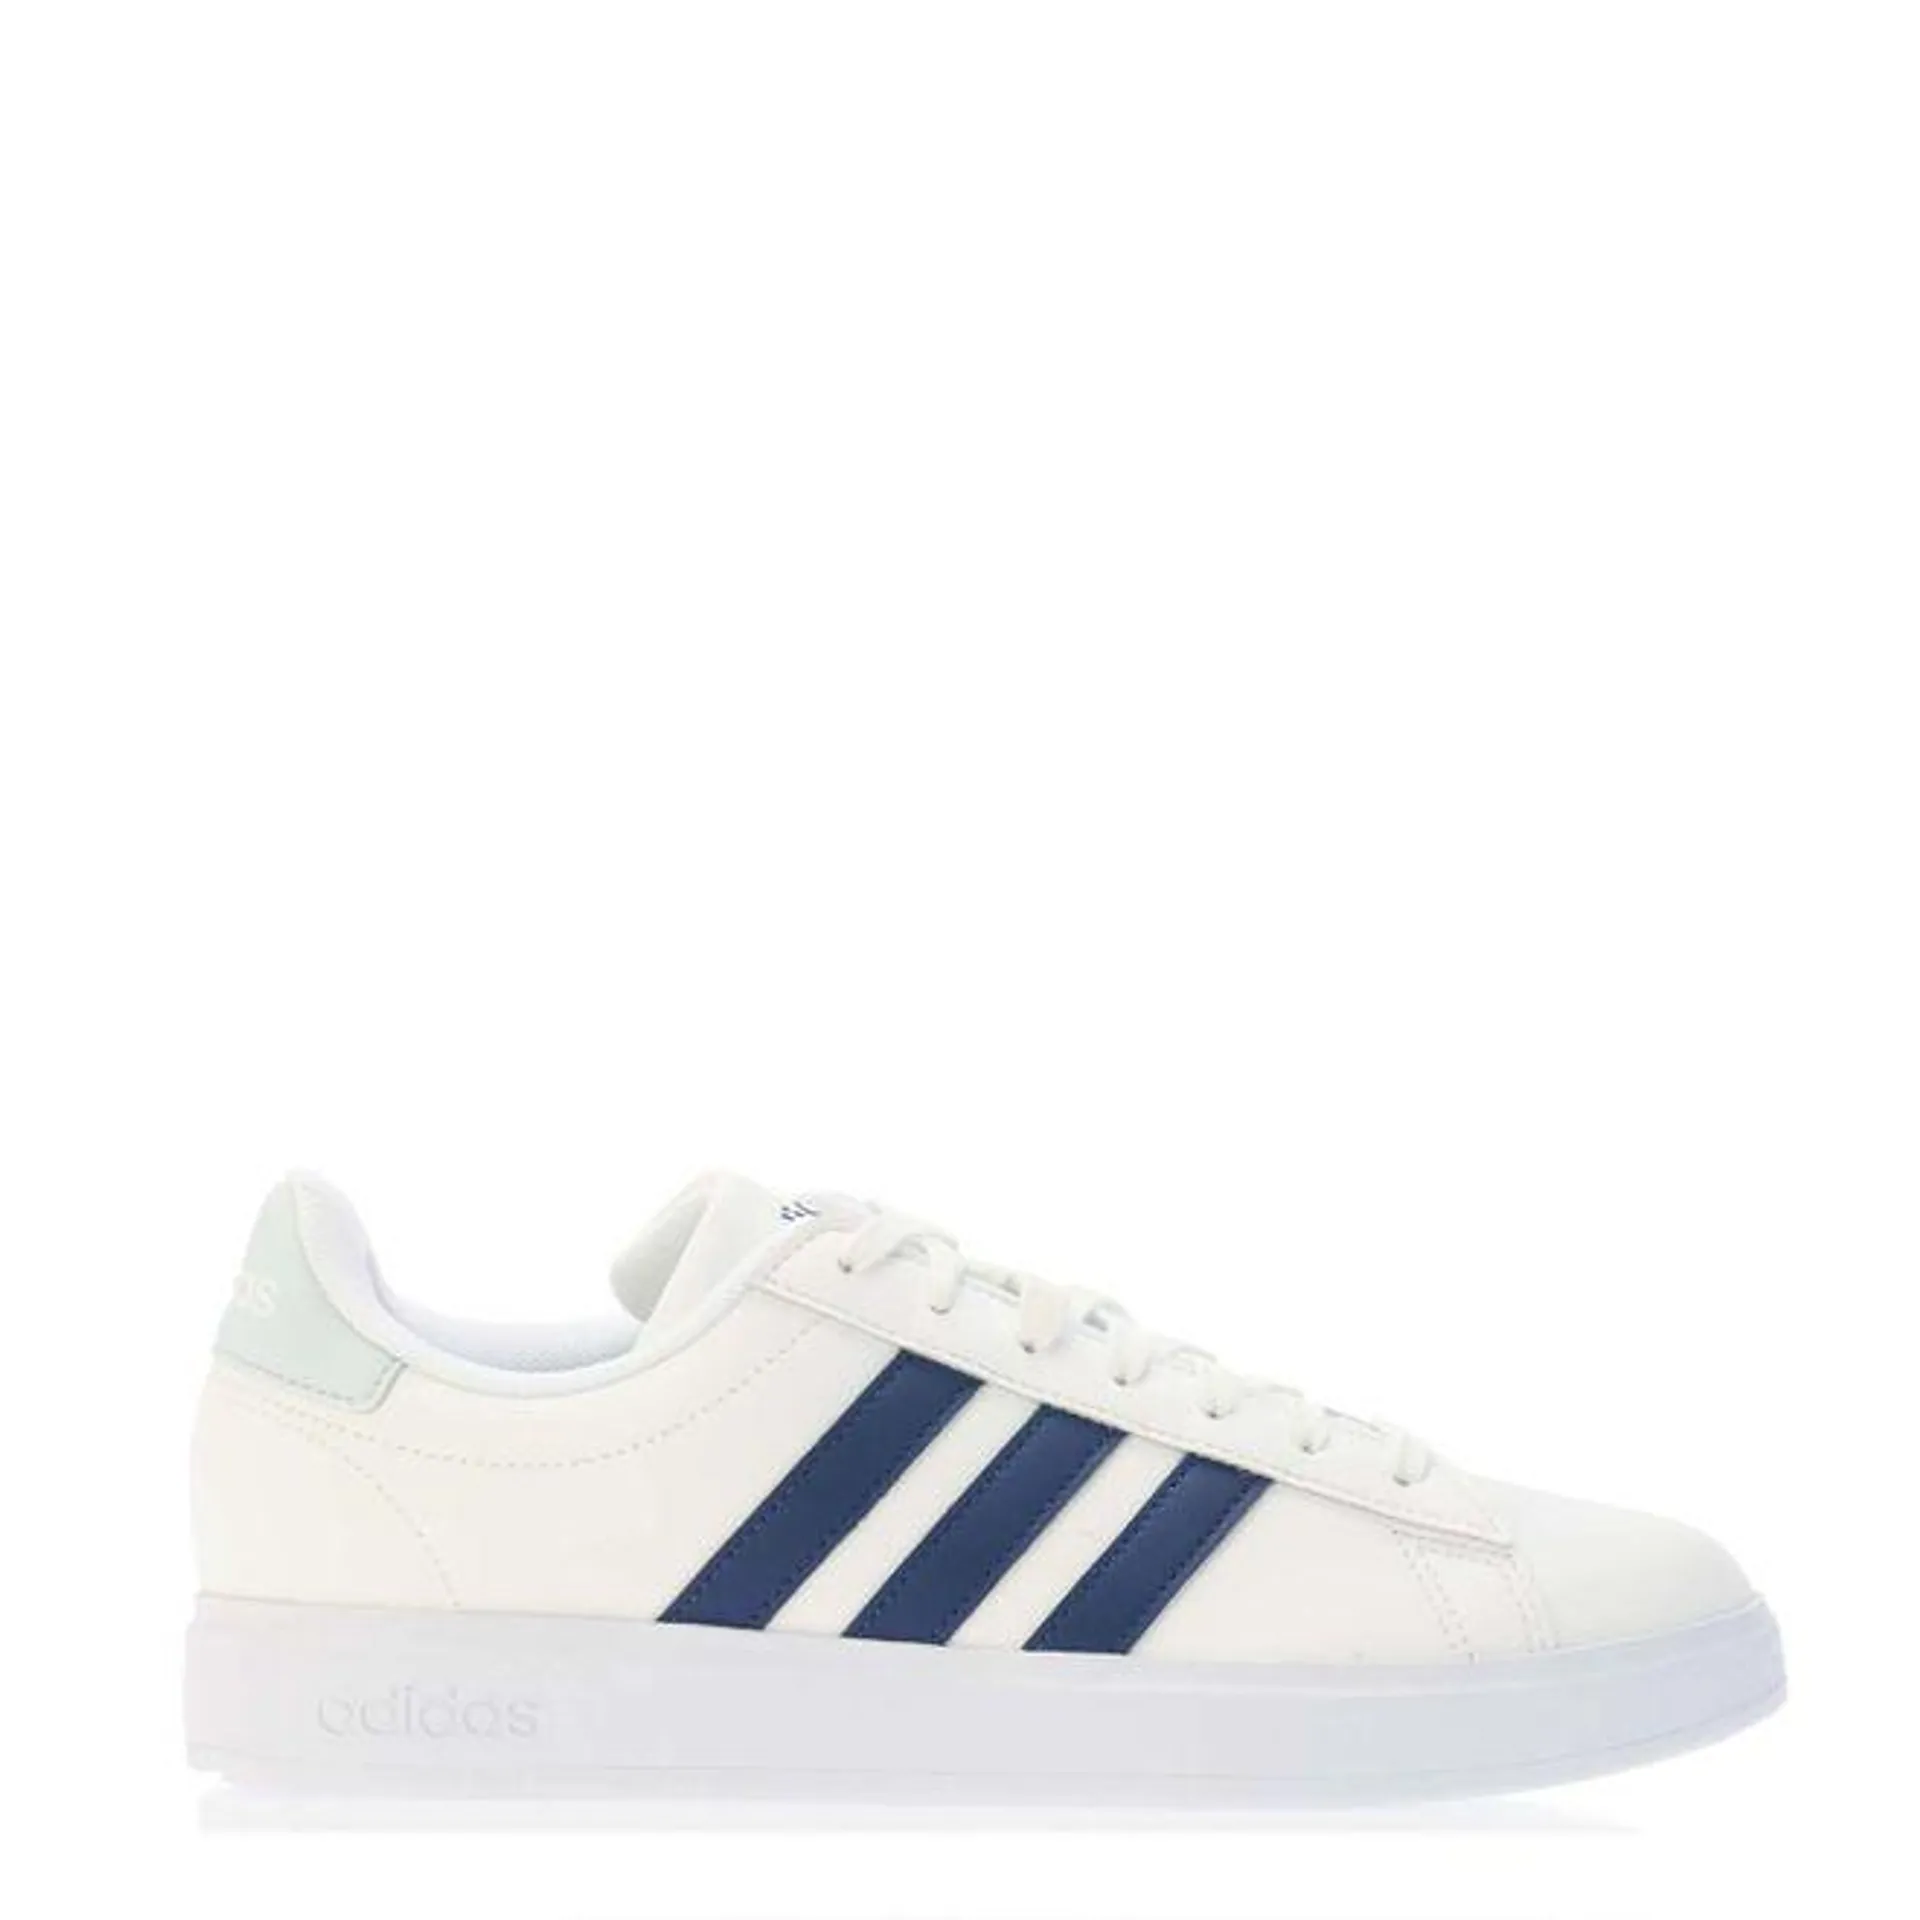 adidas Mens Grand Court 2.0 Trainers in White Navy